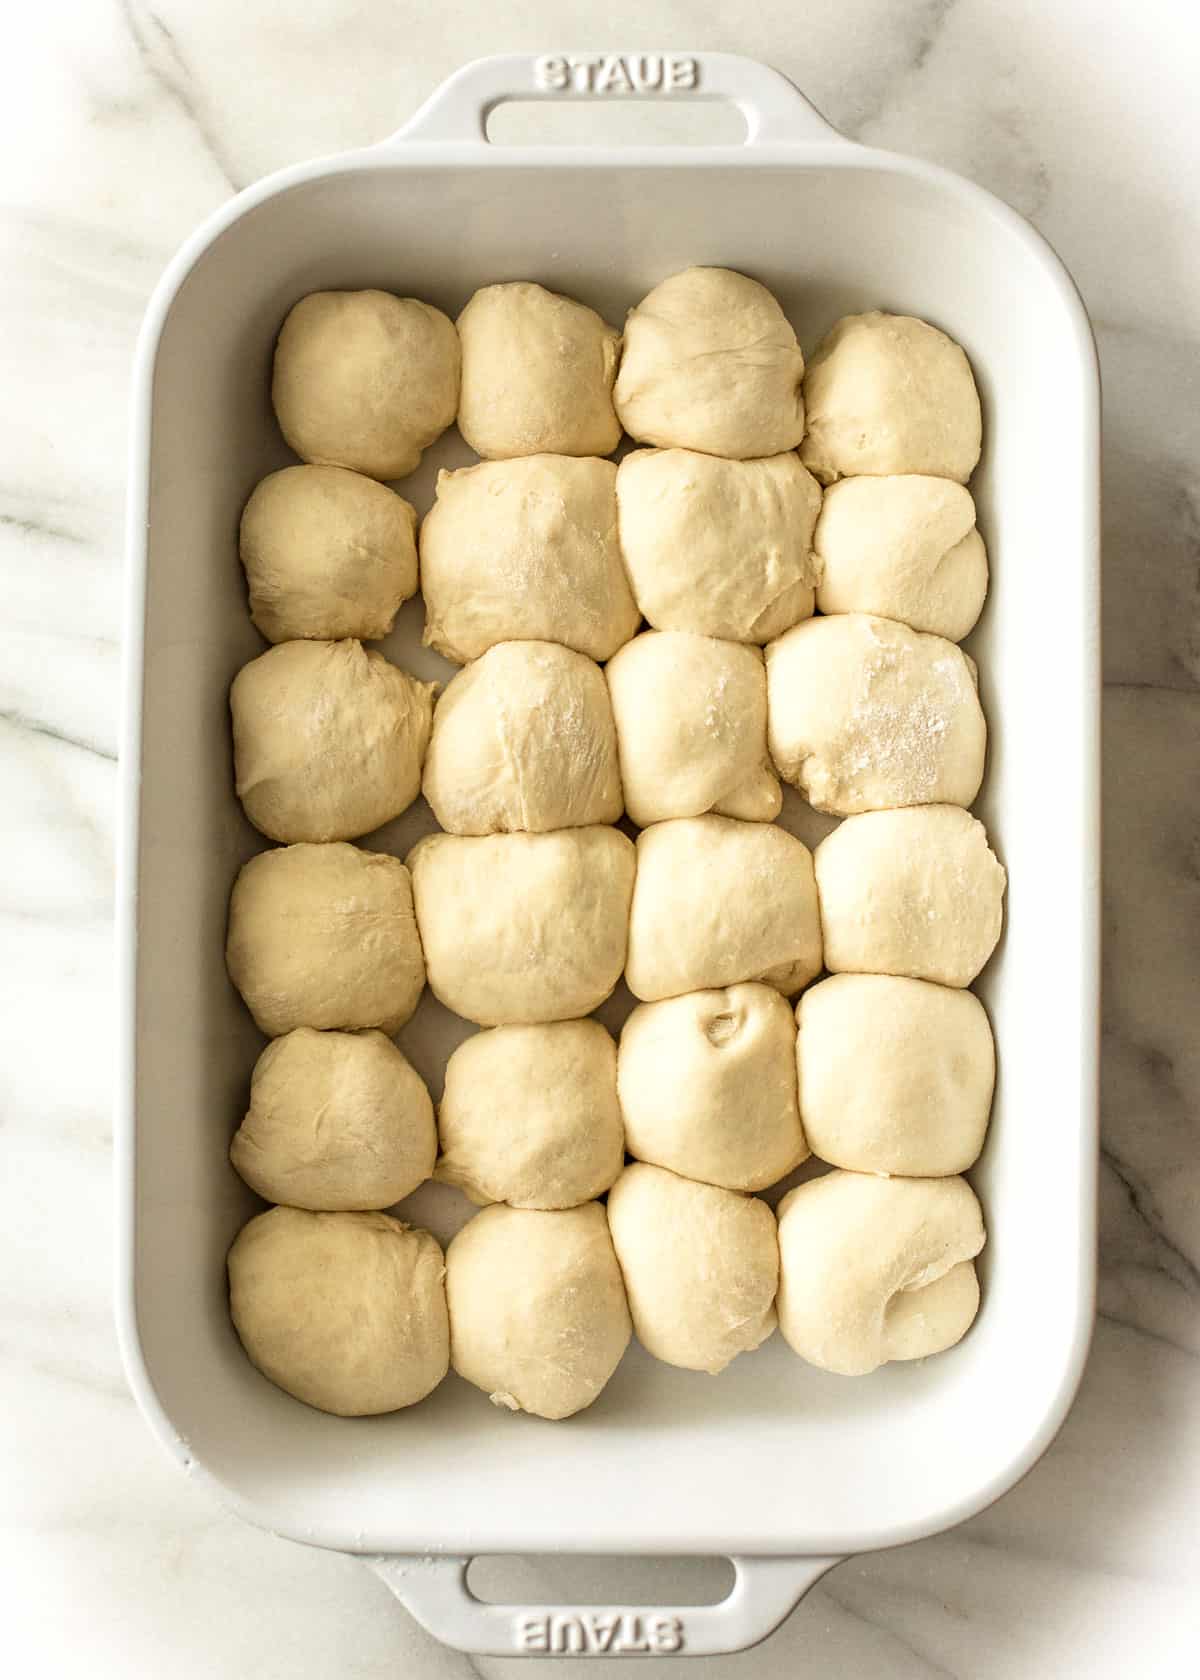 unbaked rolls in a baking pan